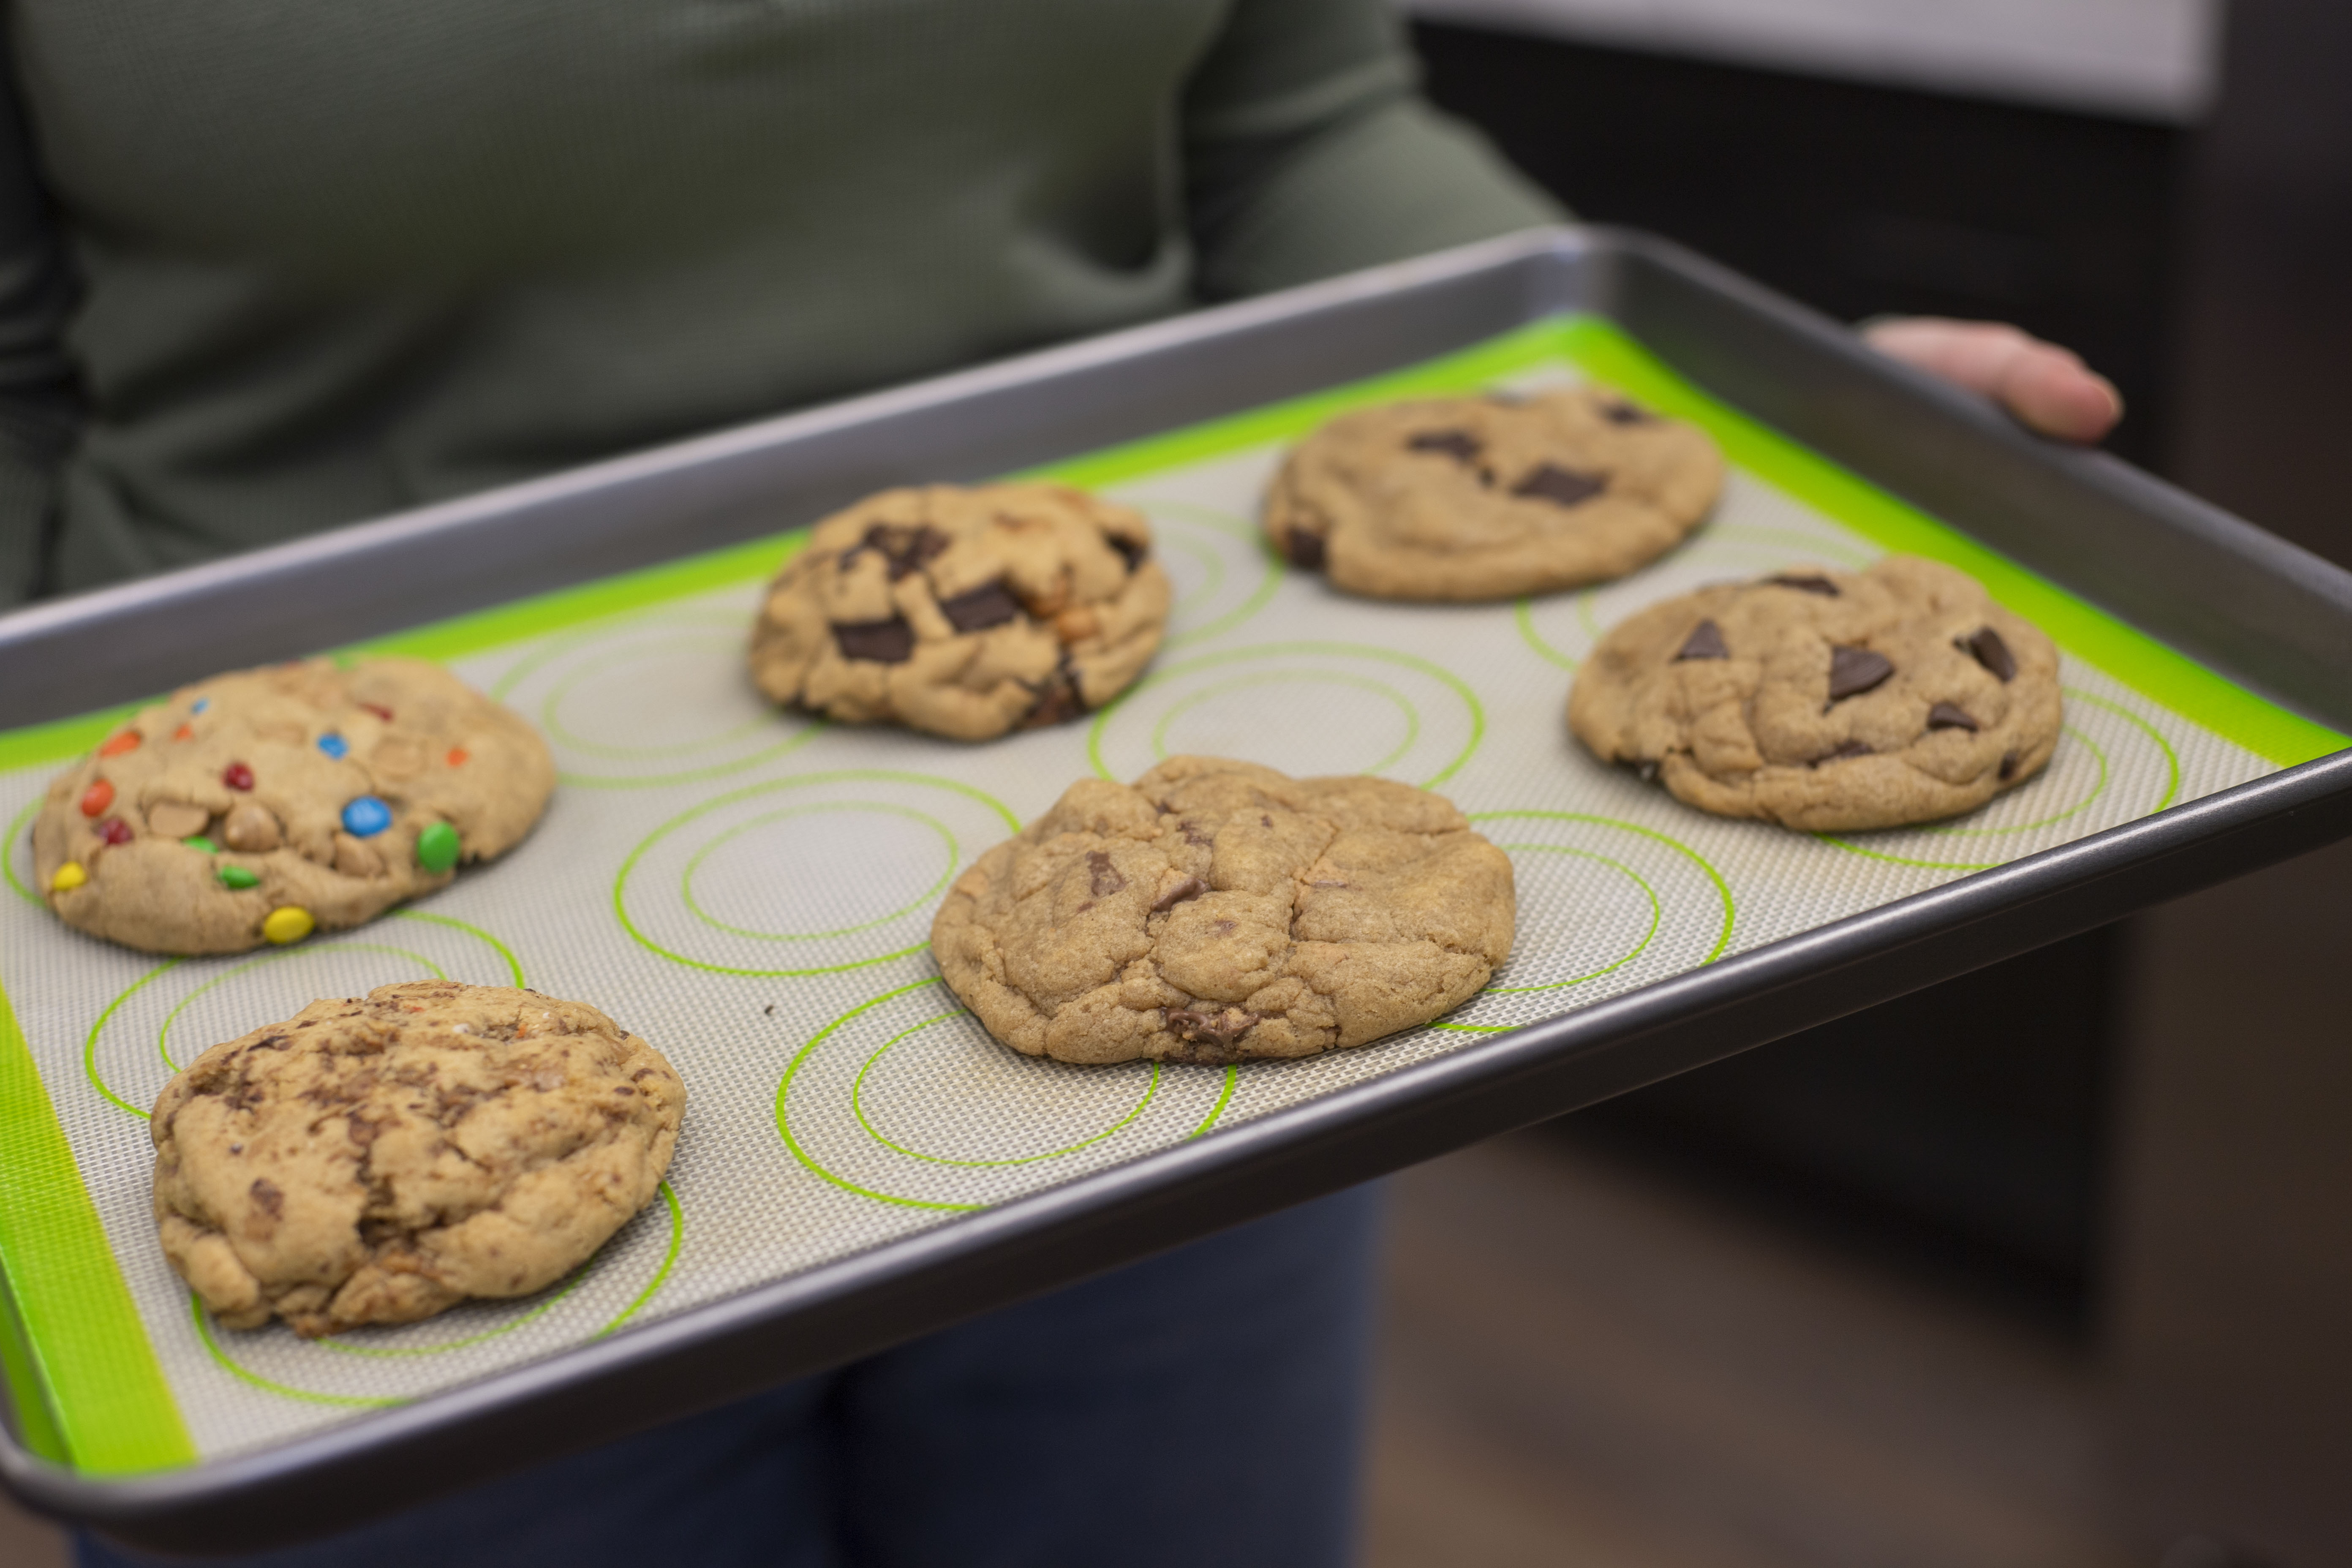 “The idea is that my customers can experience food freedom through creating their own cookie.” 